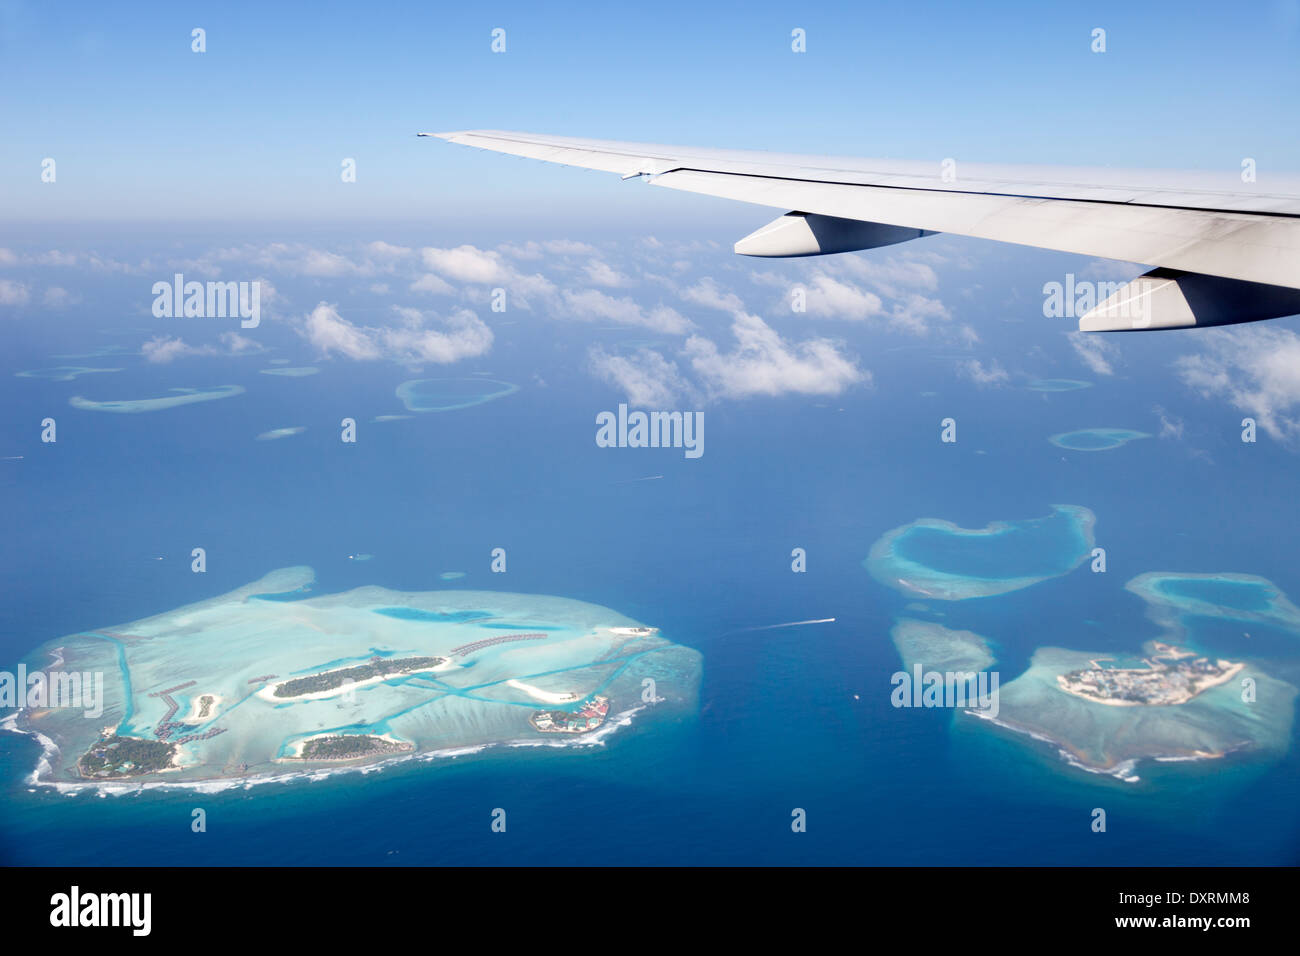 View from the window of an airplane flying above the Maldive Islands in the Indian Ocean 4 Stock Photo